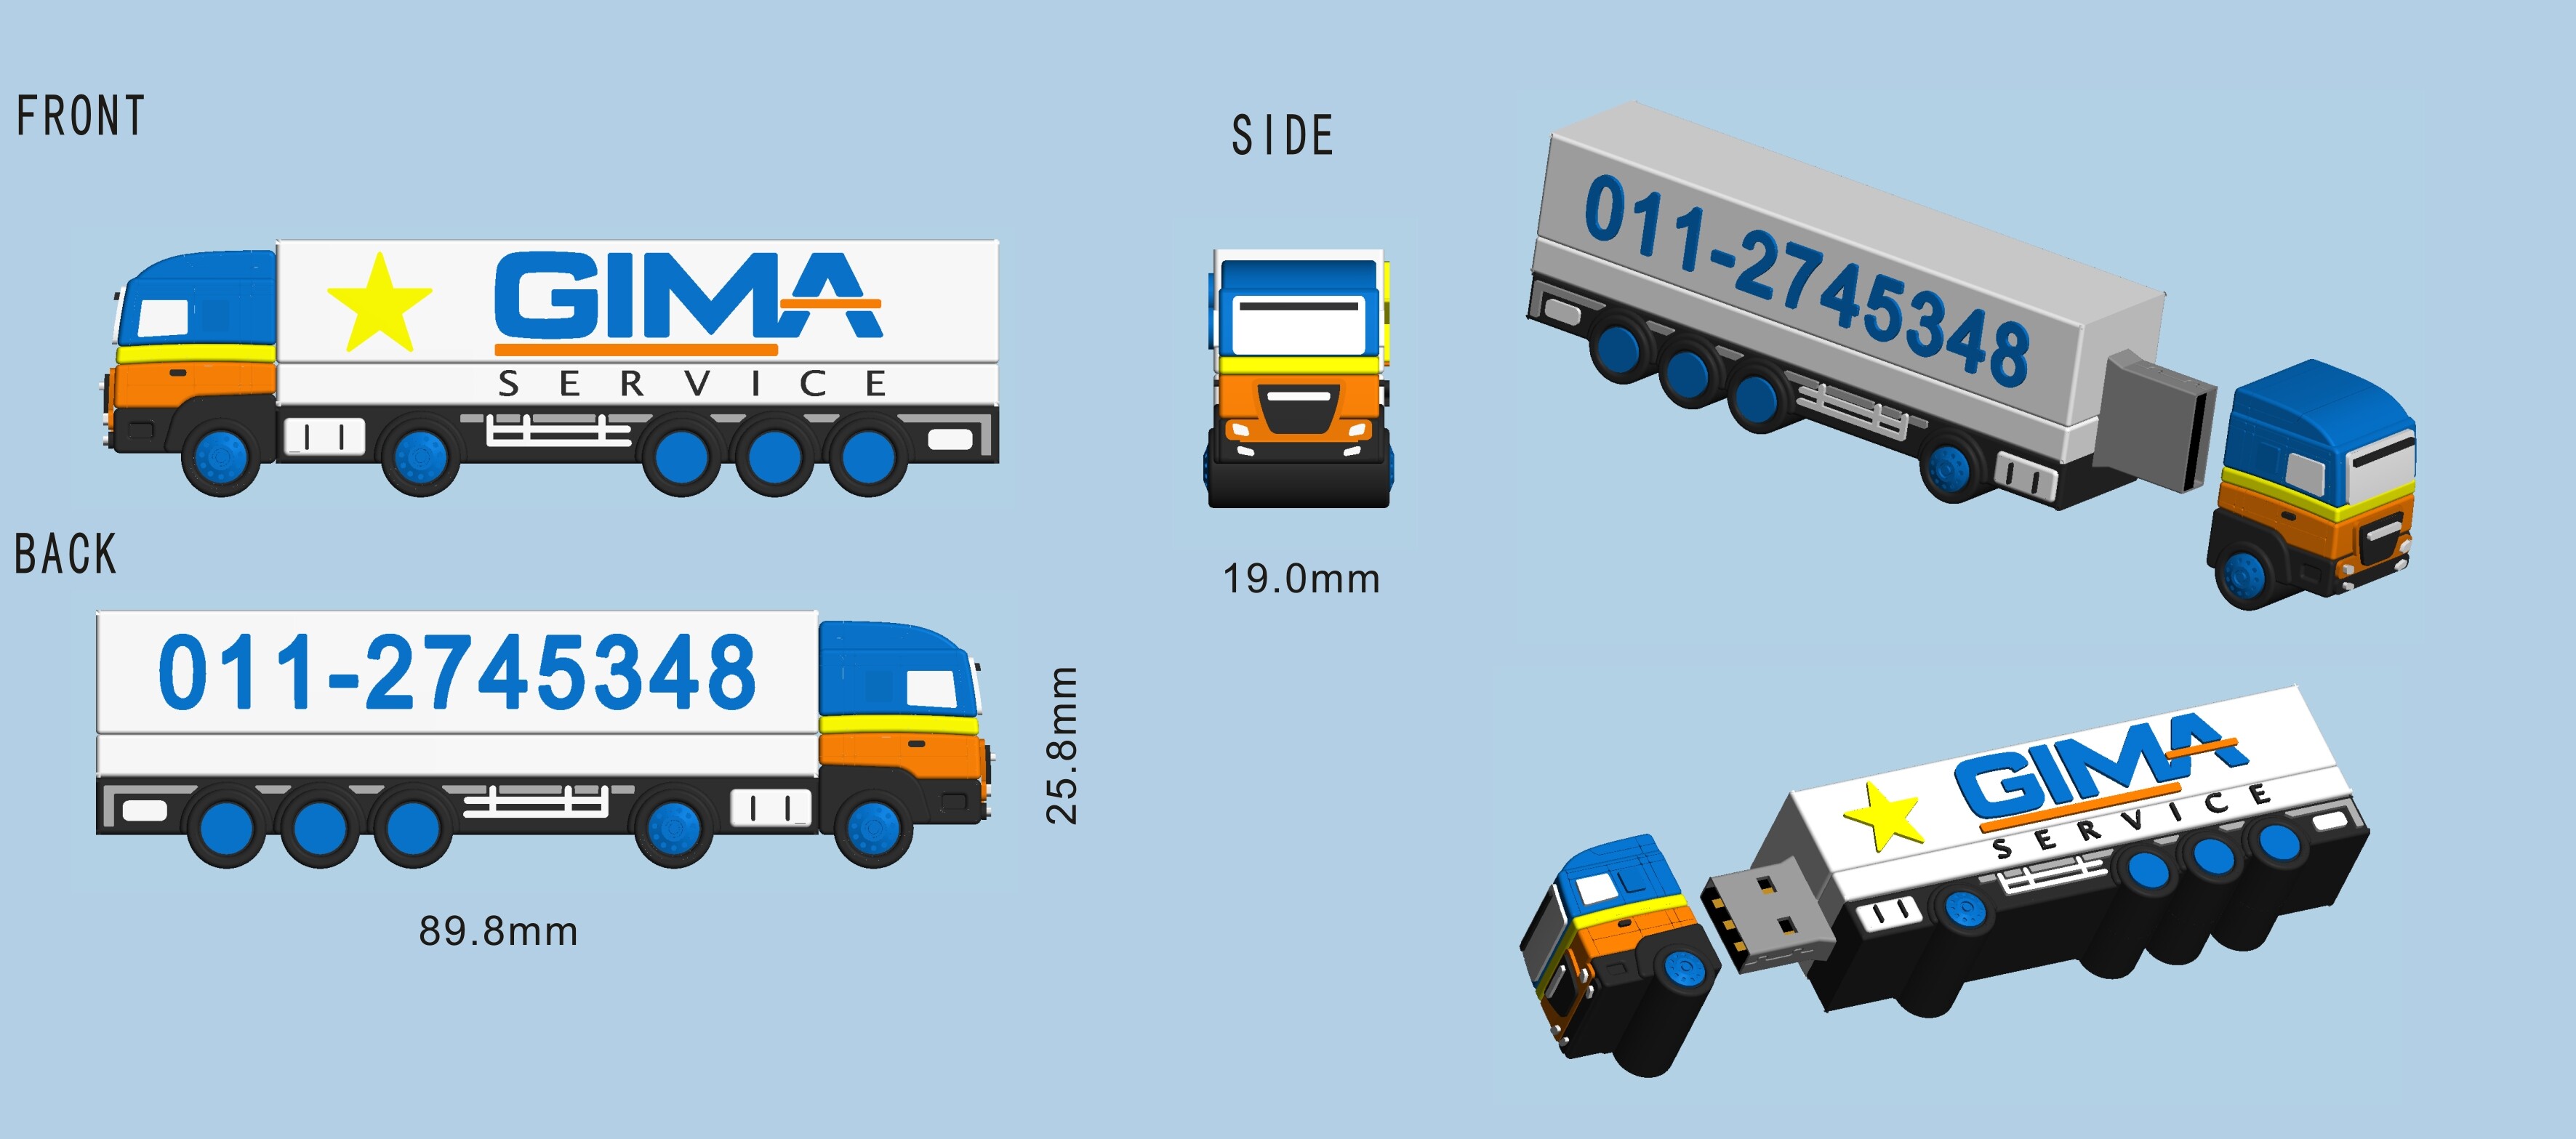 GIMA Service Ordered Customized Truck USBs